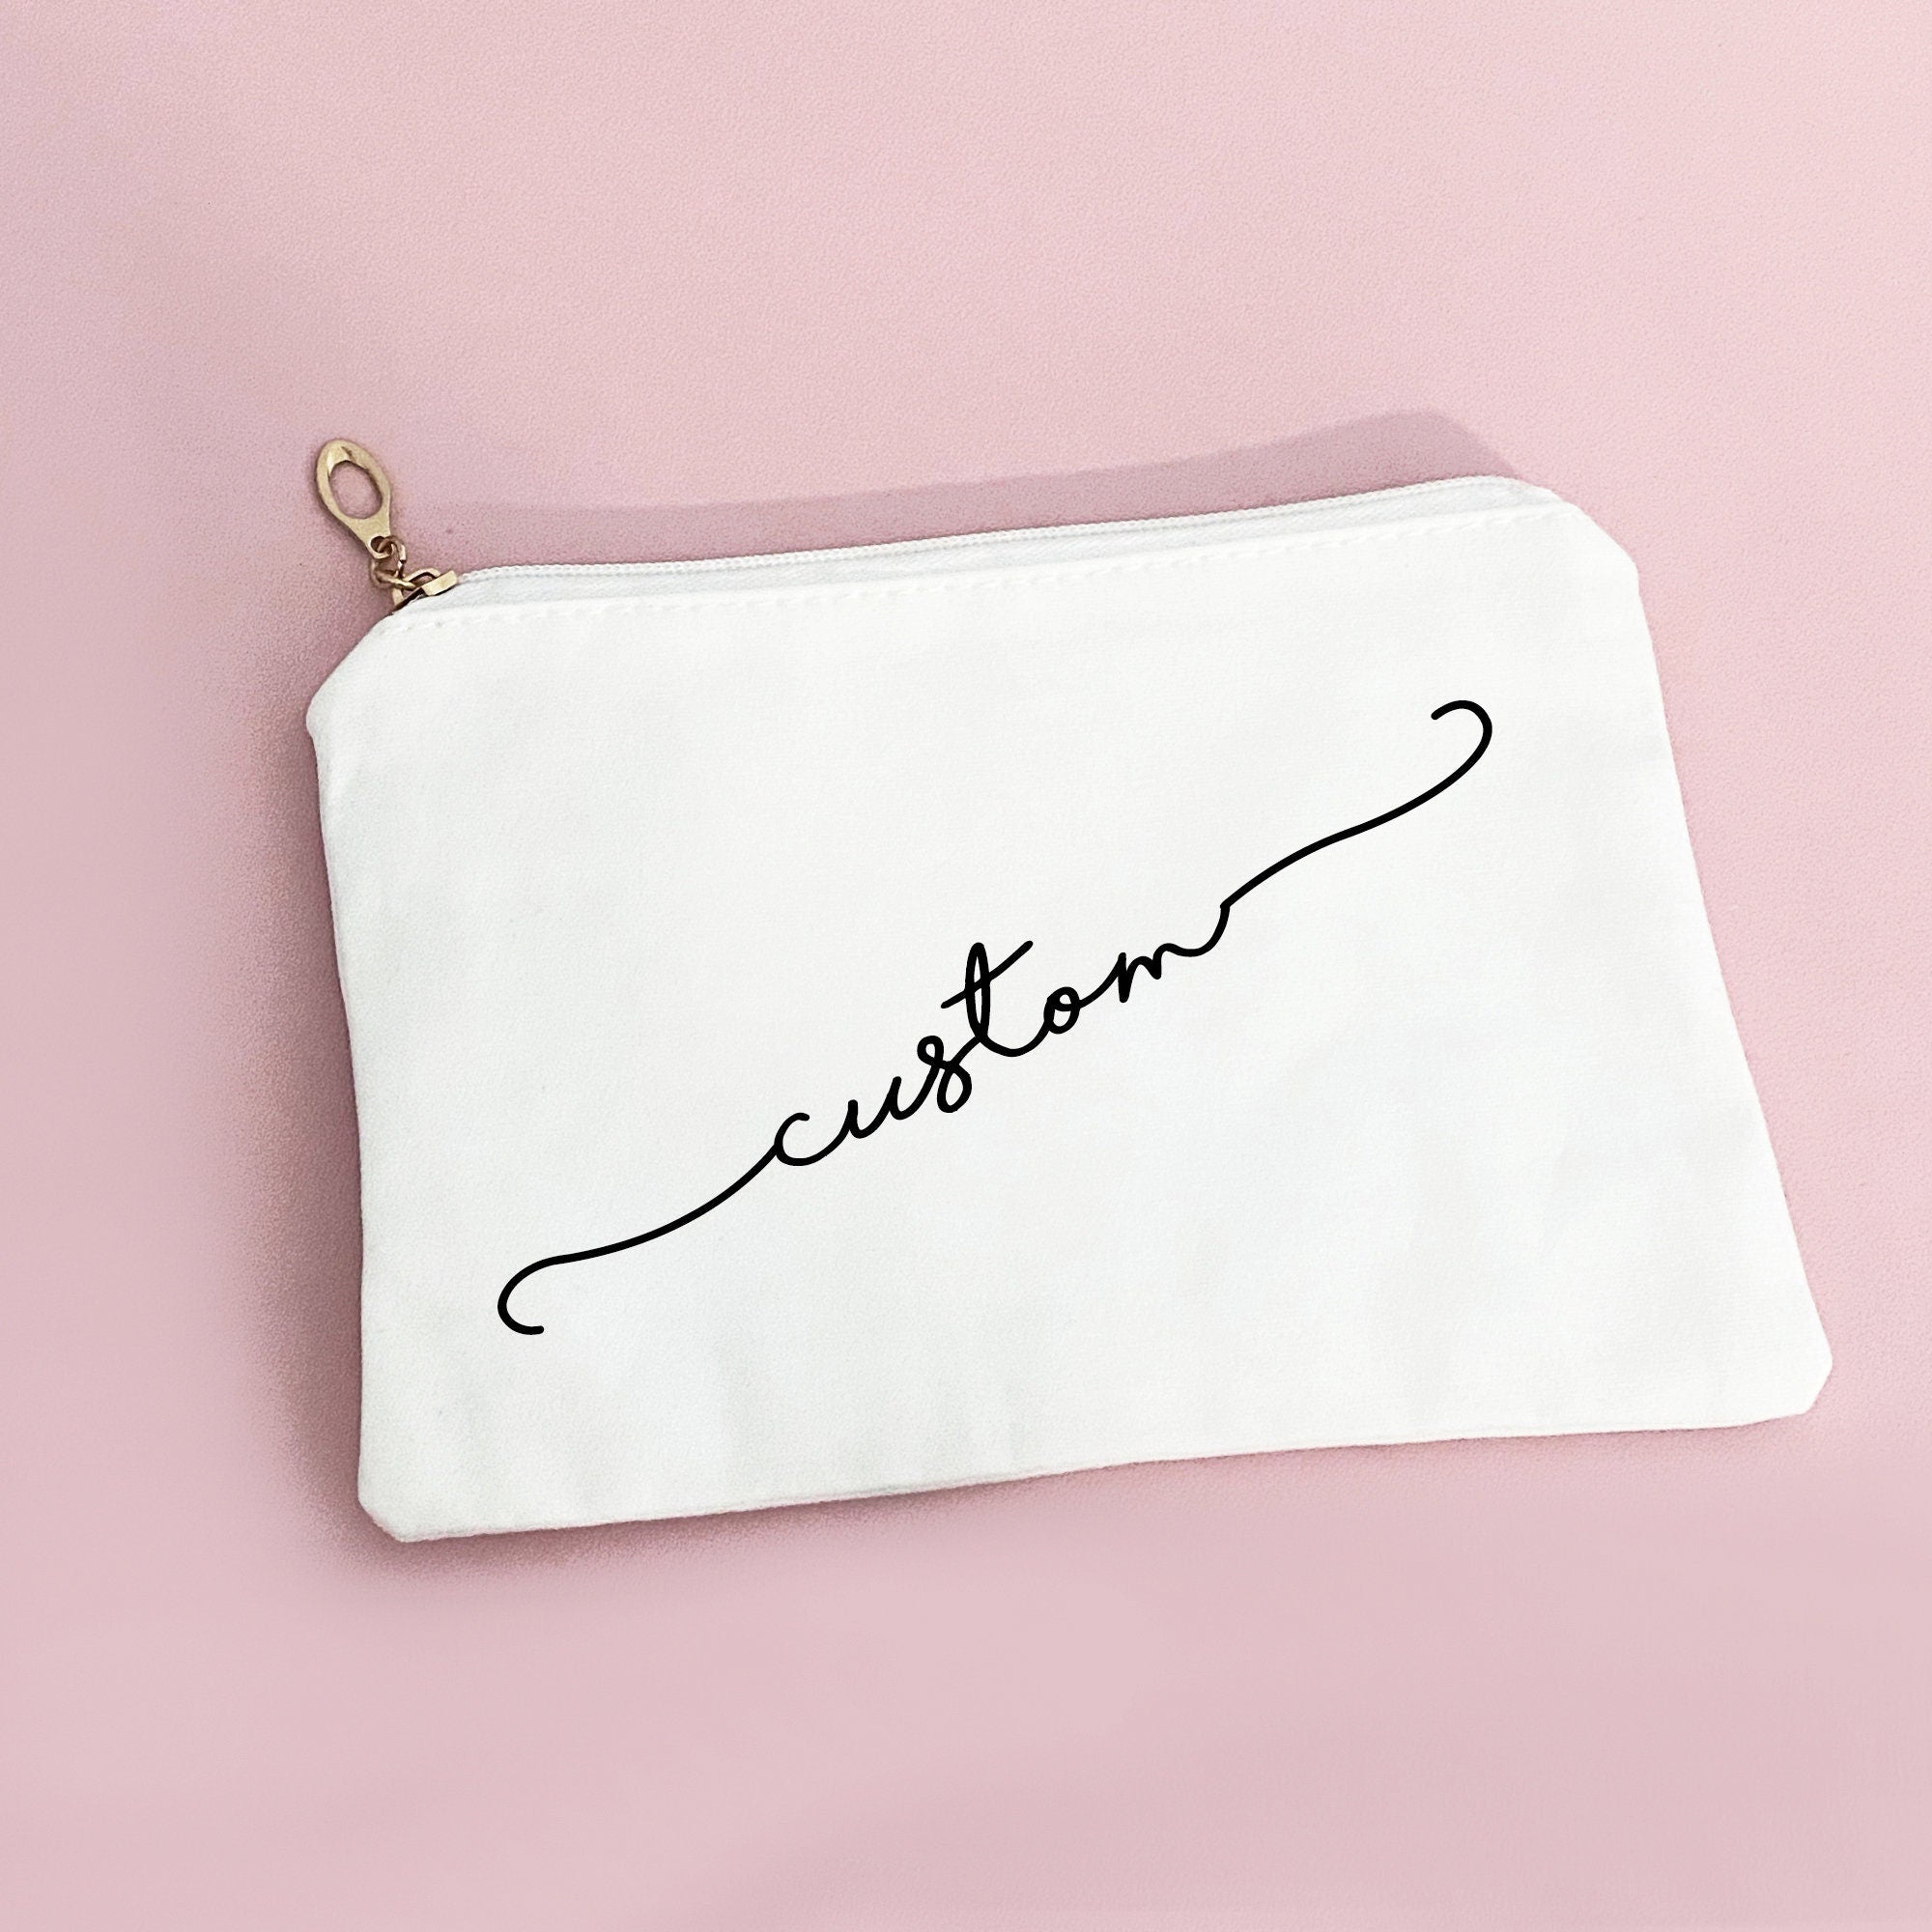 Custom Name Bag - Galentines Day Gifts - Personalizable Makeup Bag - Cute Valentines Day Gifts for Her - Gifts for Her